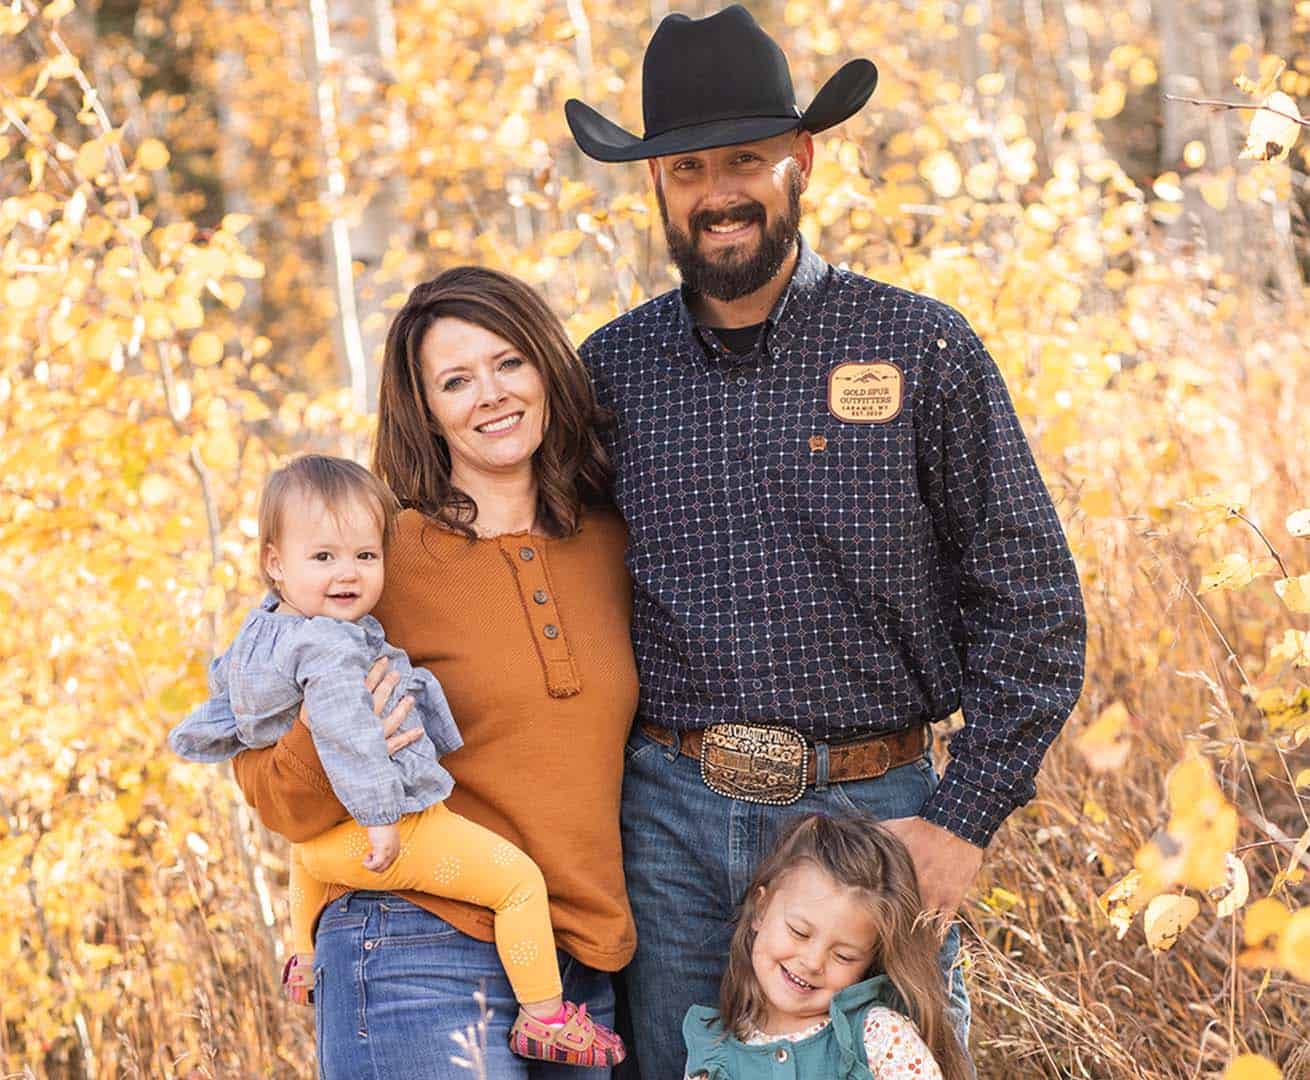 Kristie Twitchell poses with her family in front of fall foliage